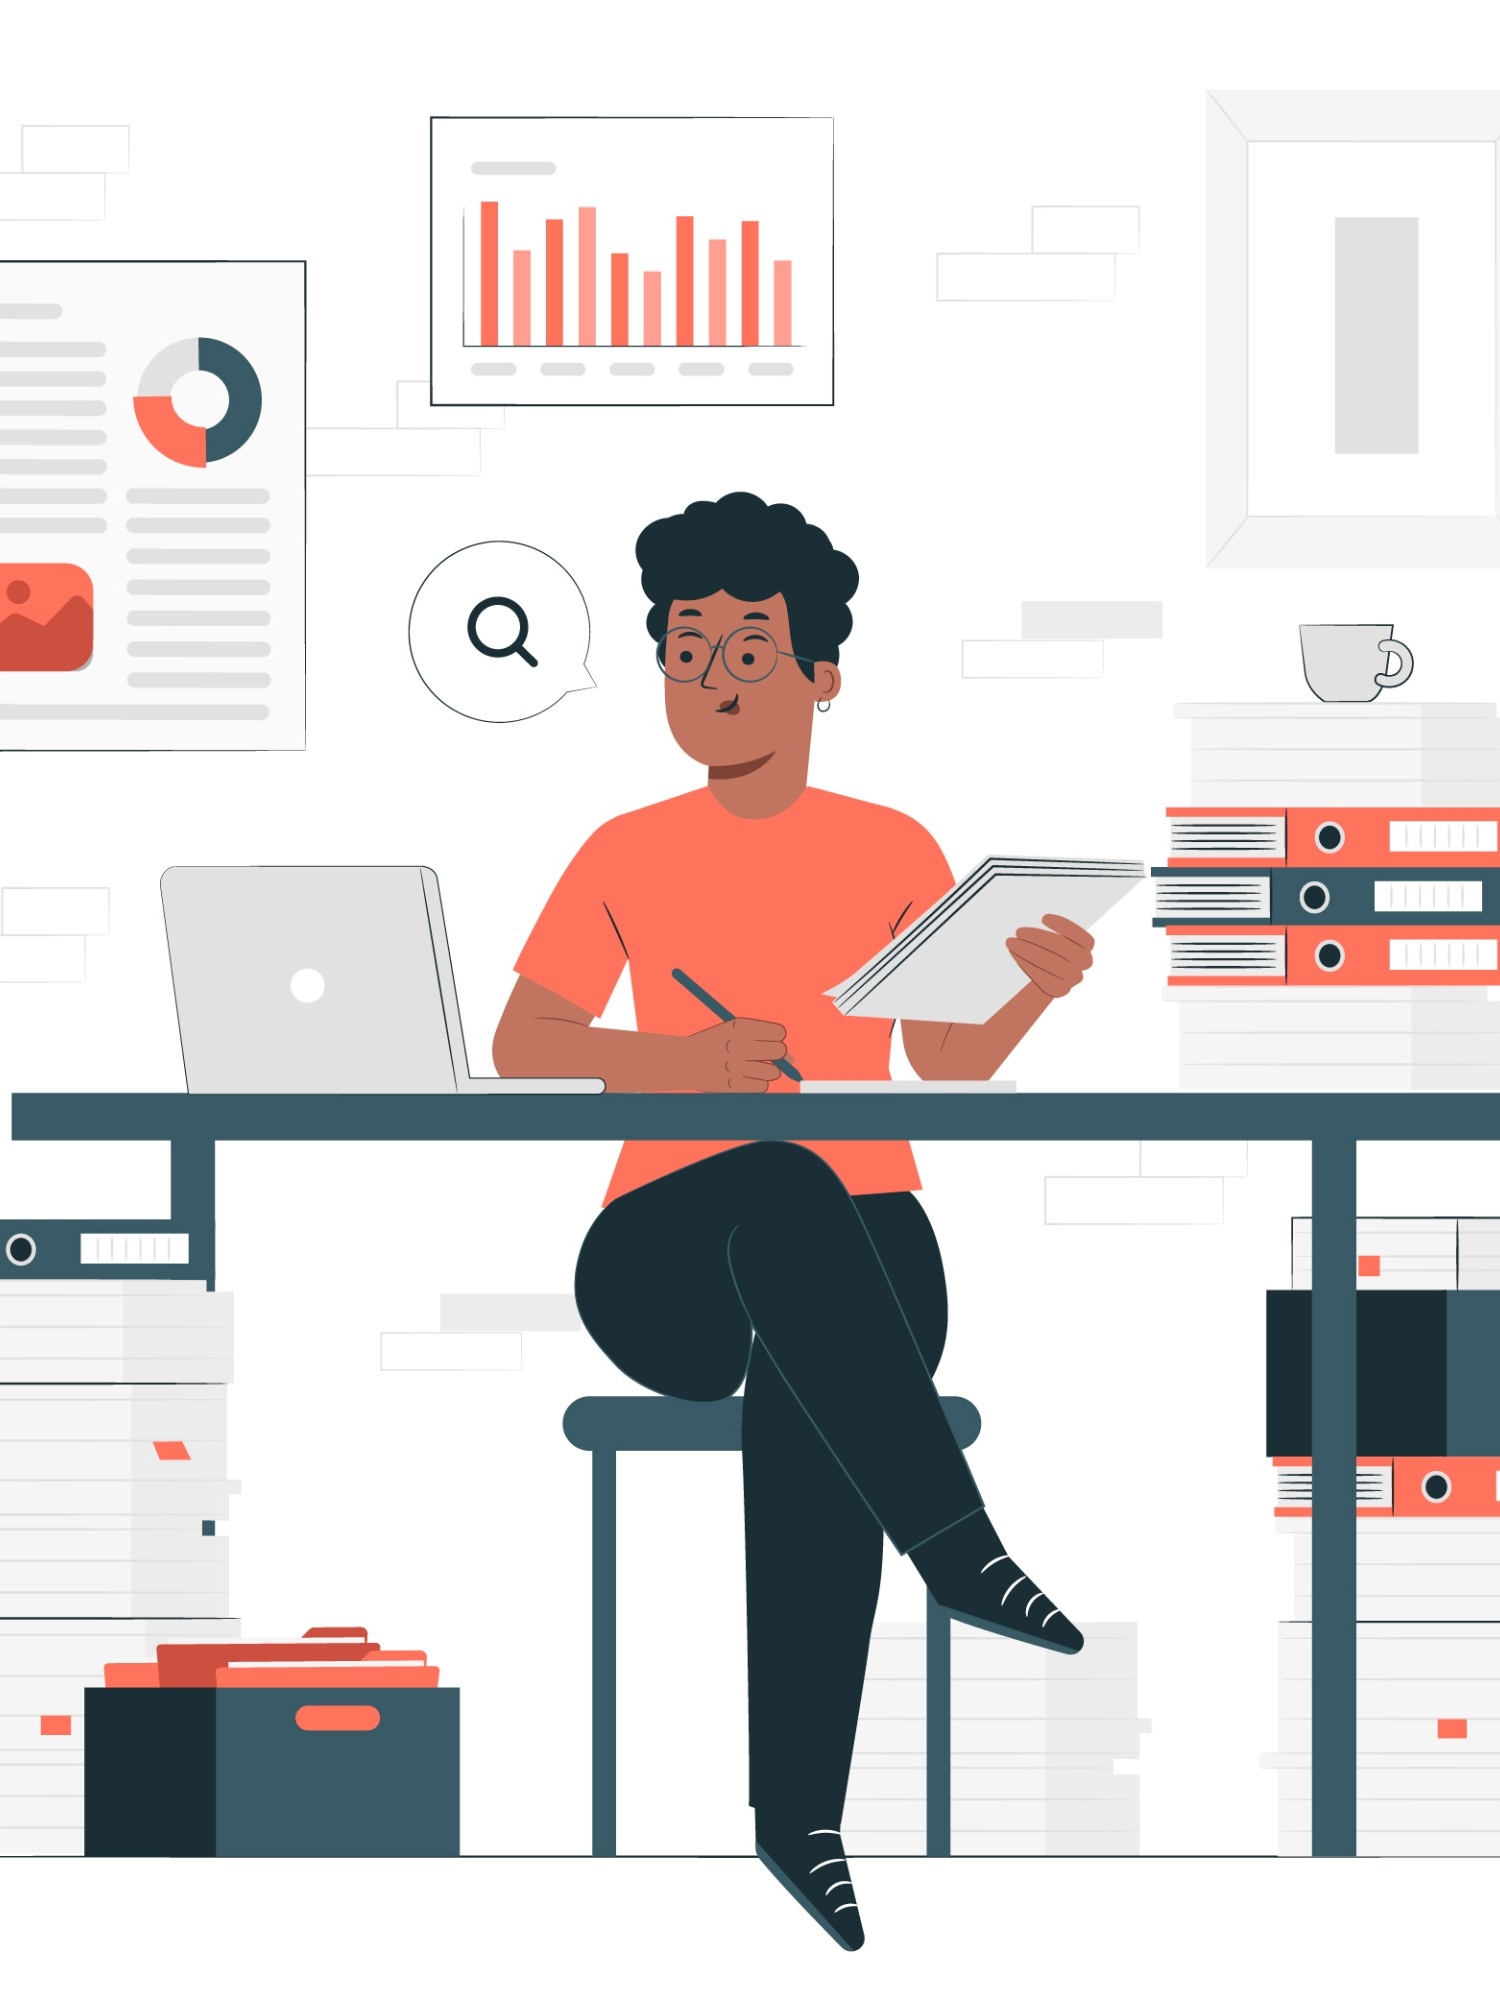 Illustration of a dark skinned person with short hair and glasses sitting a desk in front of a laptop. They are holding a stack of paper and a pen. The room has many books in it and charts on the walls.  